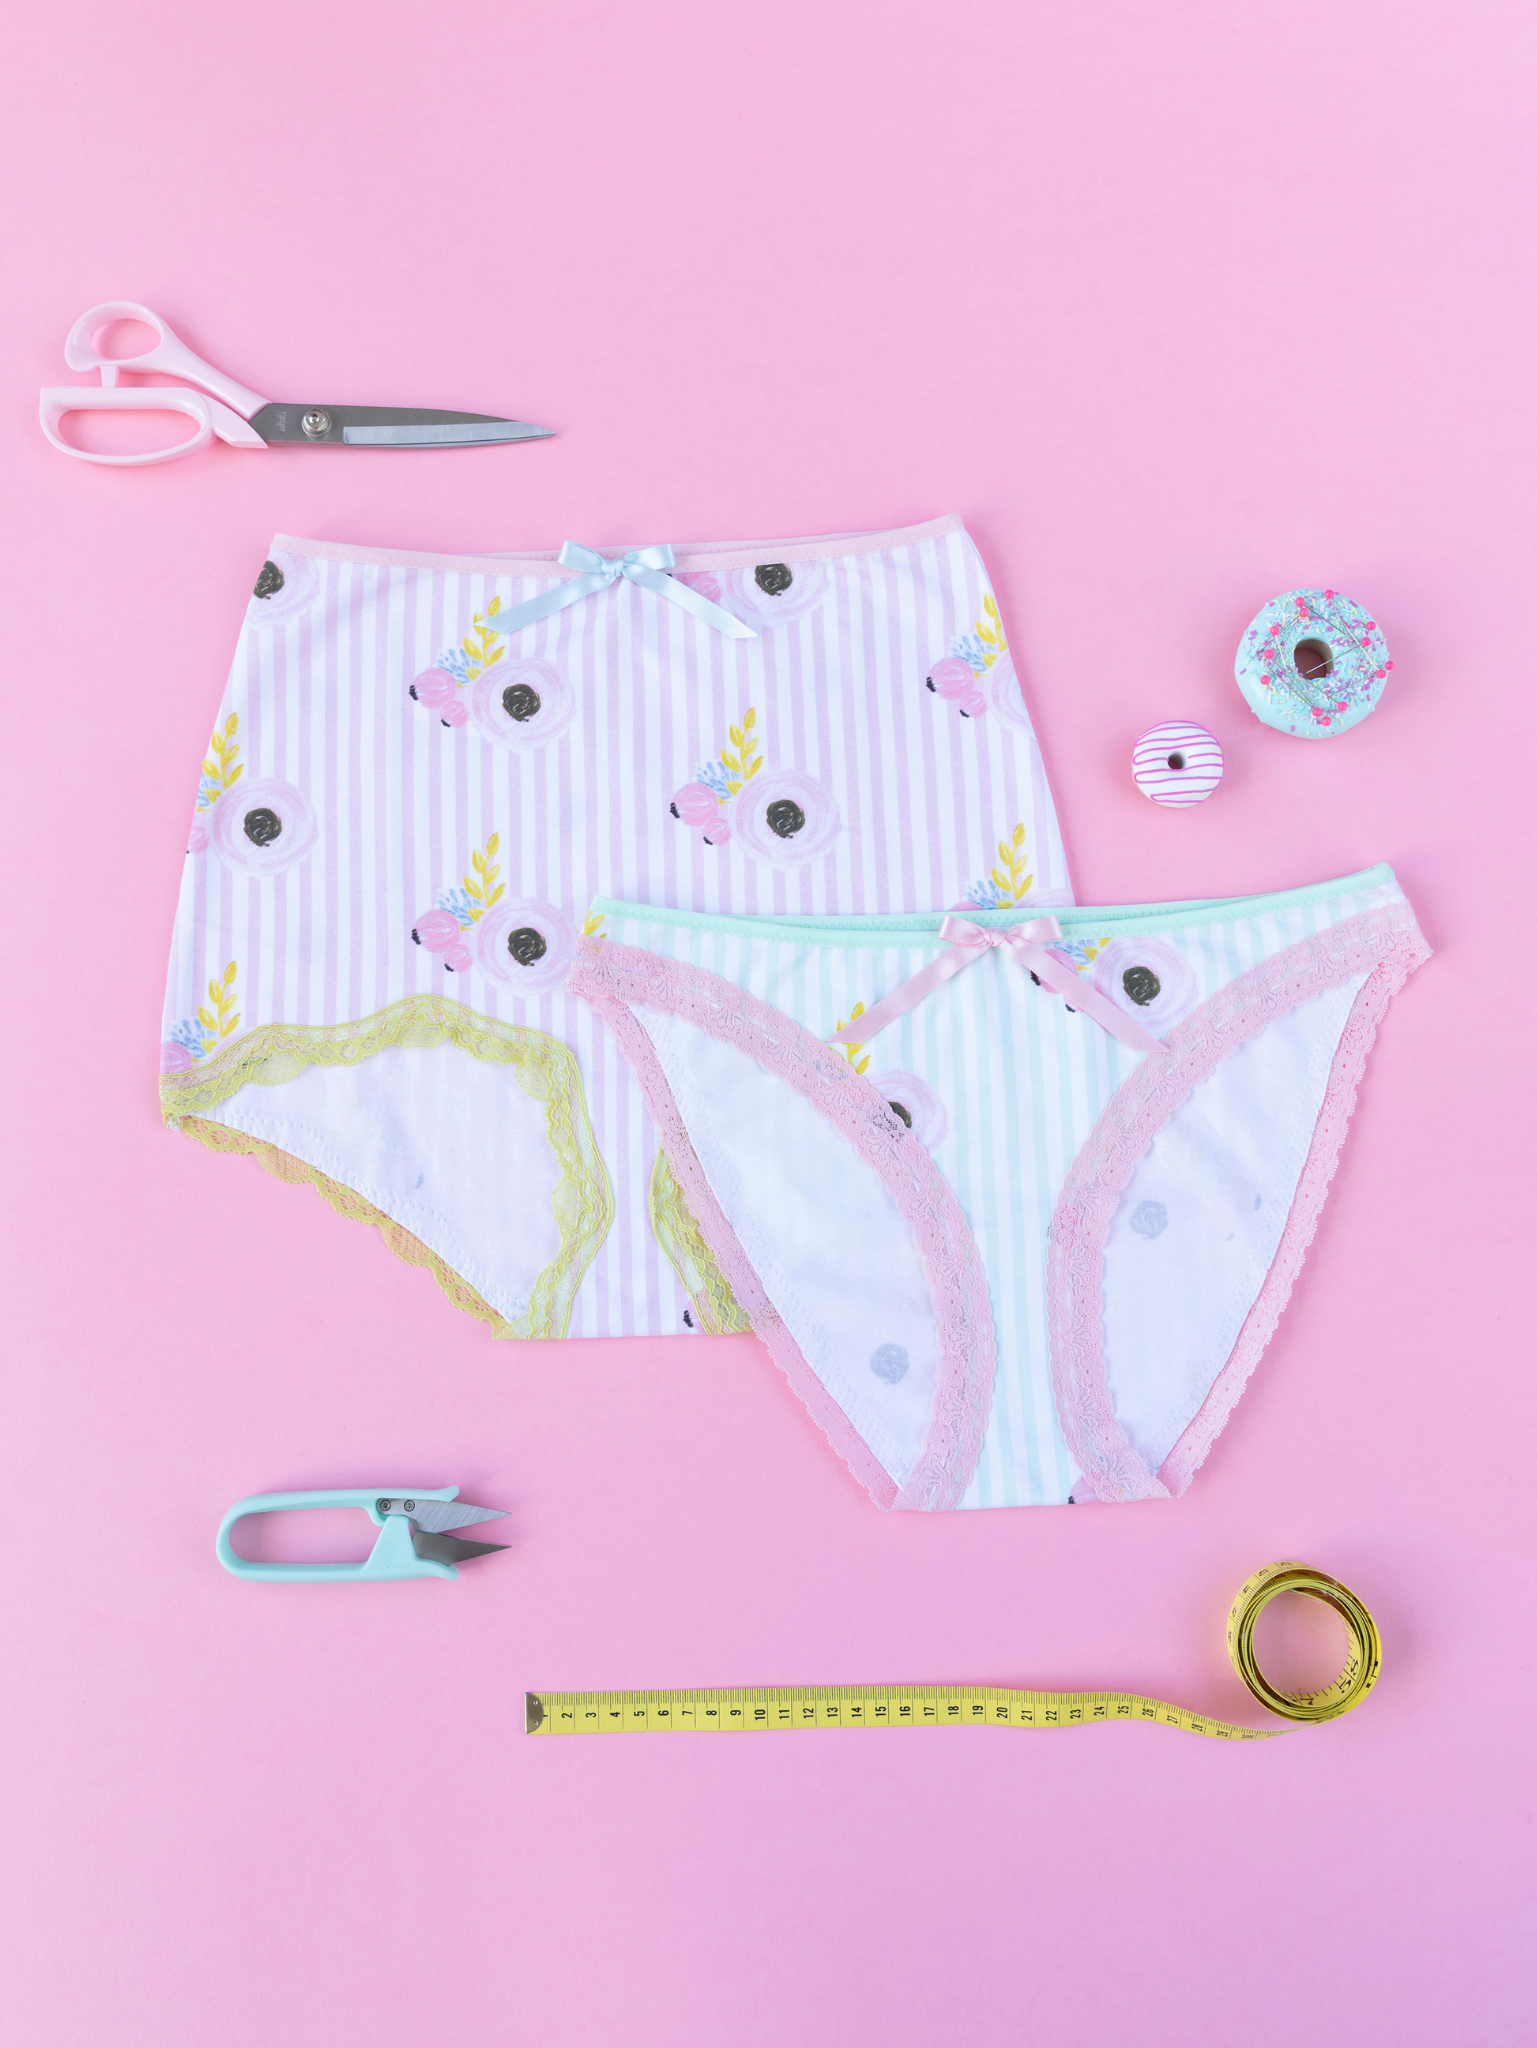 Iris Knickers by Tilly and the Buttons – Sew Yarn Crafty & Studio